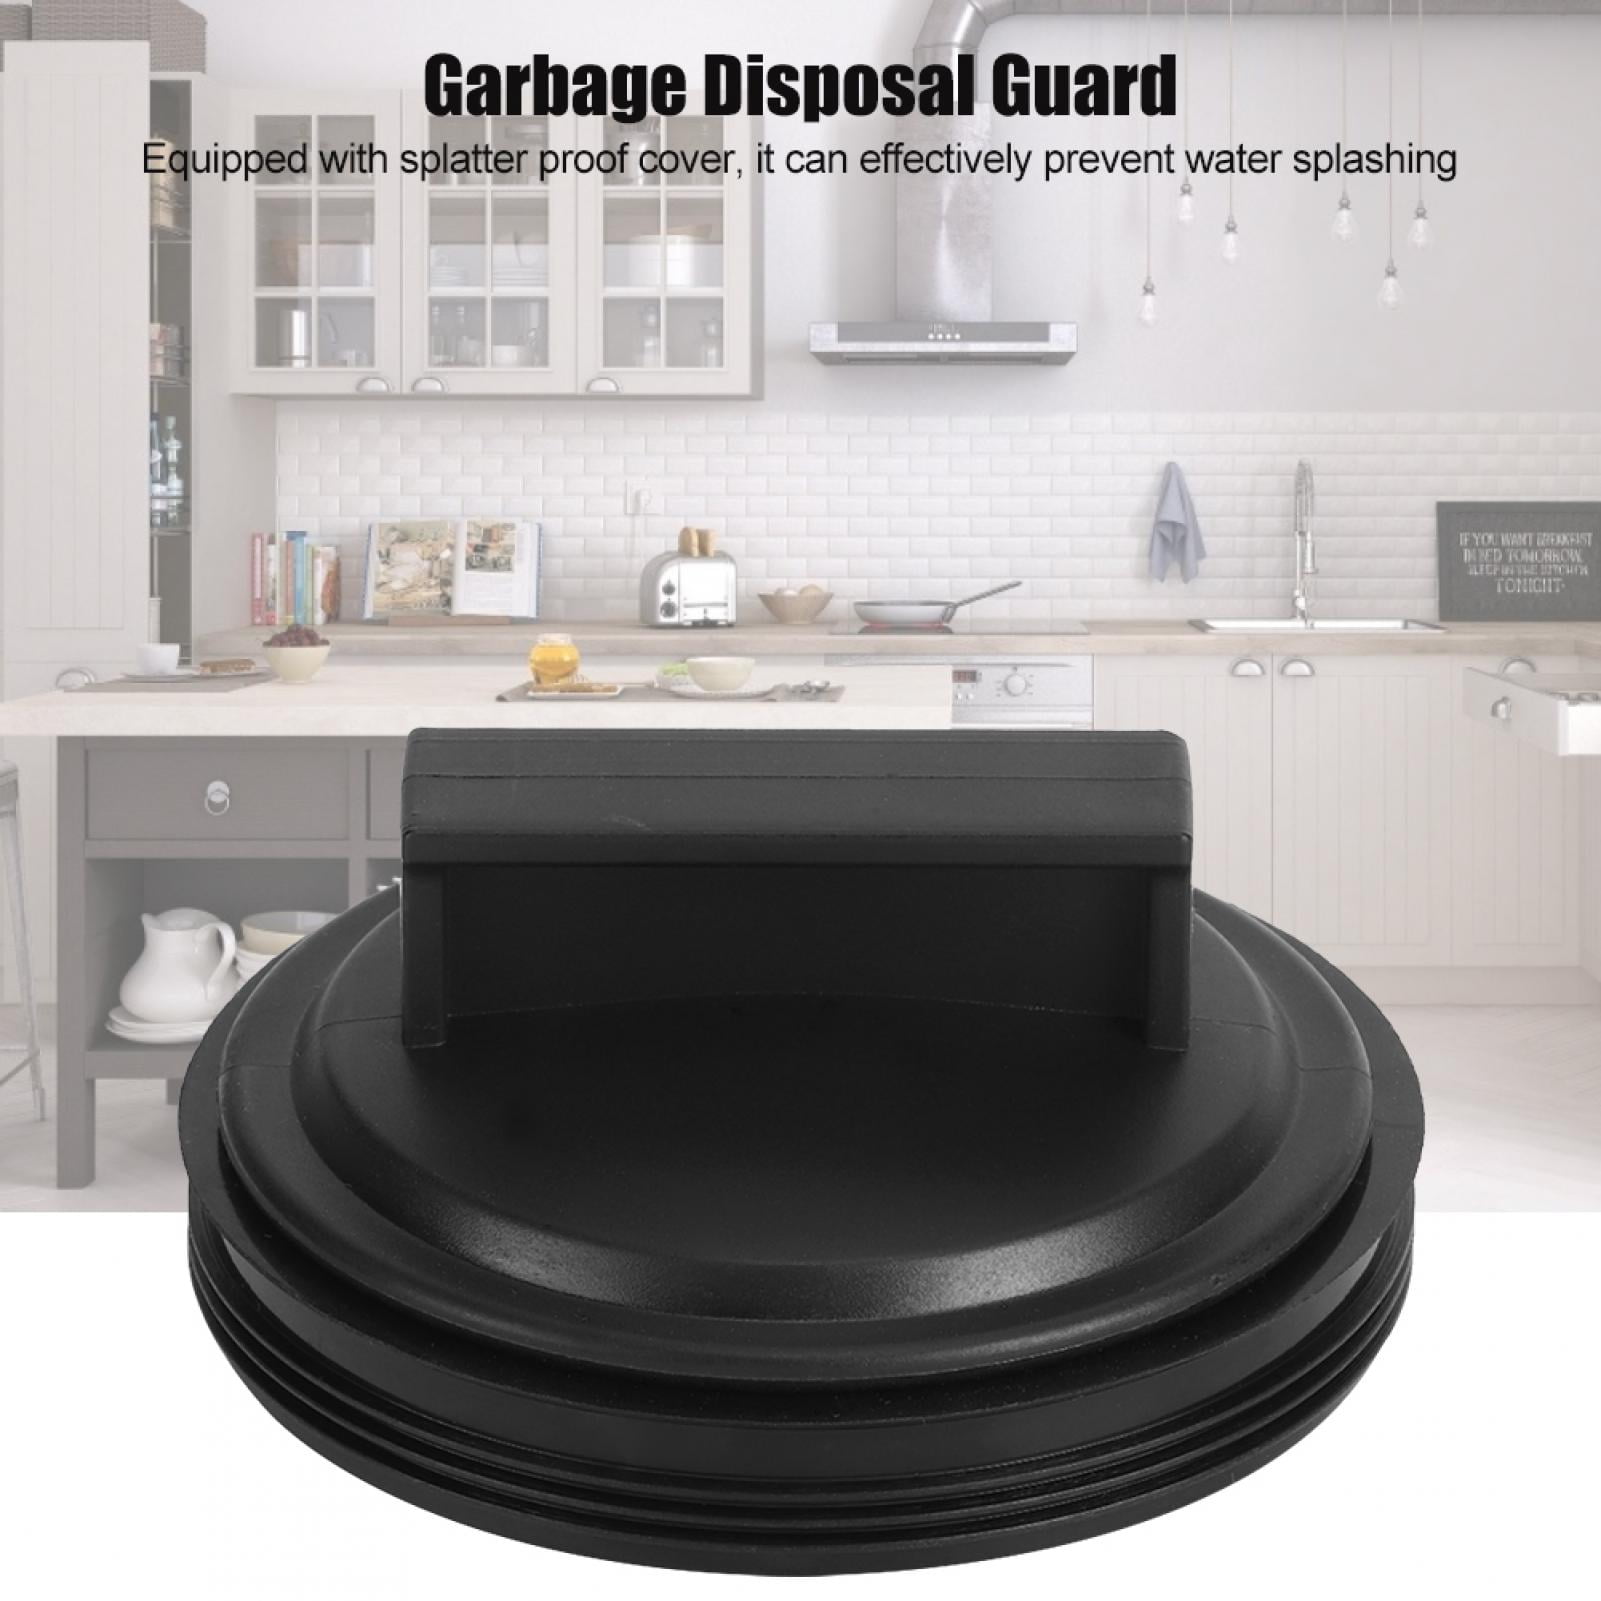 Mellbree Kitchen Sink Plug Stopper for Flange Drain Texture Black Drain Cover with 3 3/8 Garbage Disposal Splash Guard for InSinkErator Evolution Series QCB-AM Garbage Disposal Stopper 